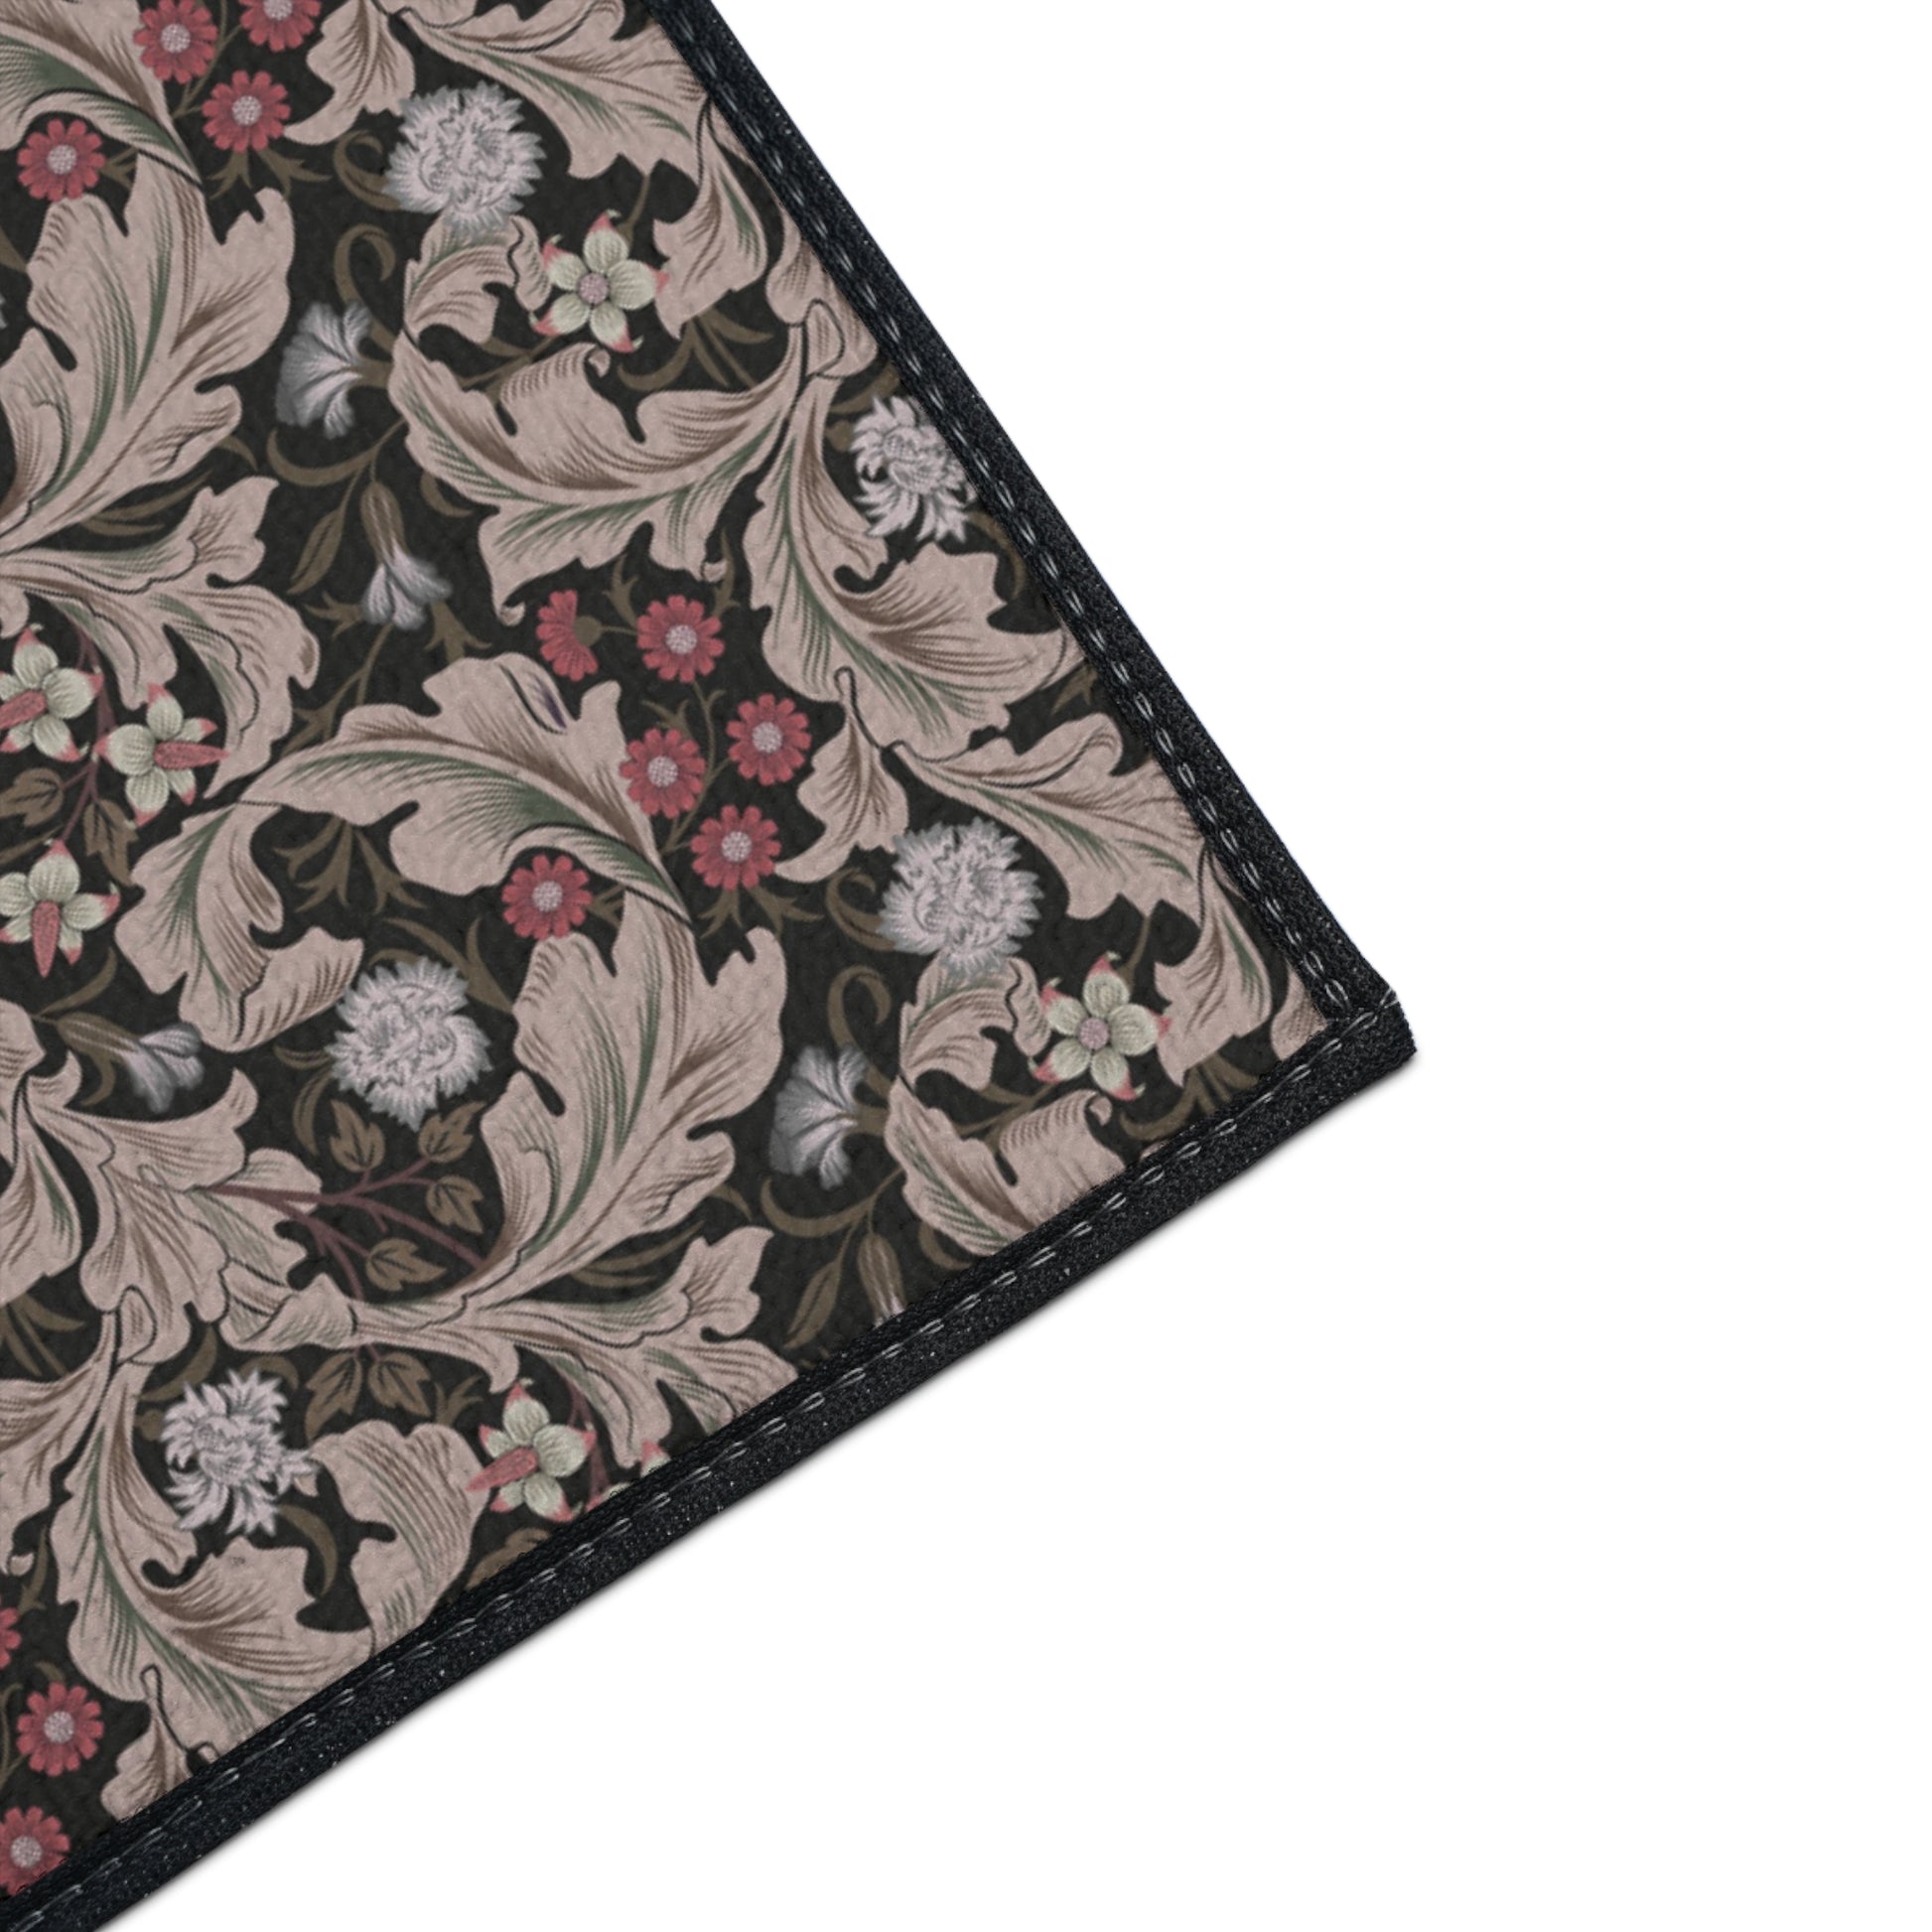 william-morris-co-heavy-duty-floor-mat-leicester-collection-mocha-10